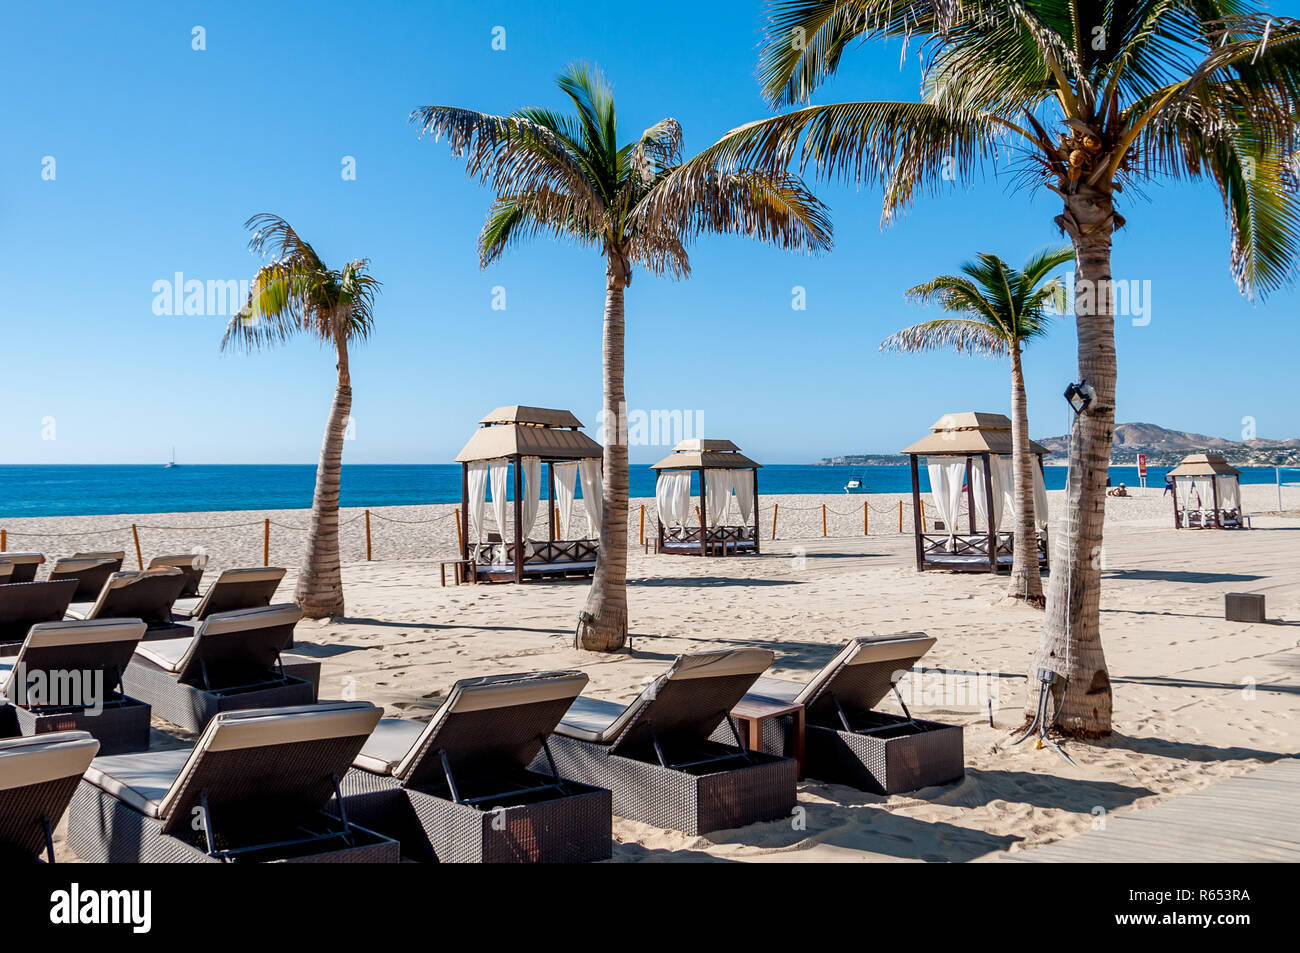 White sand beach with lounges and cabanas at Hyatt Ziva Los Cabos, an all inclusive resort at San Jose del Cabo, Mexico. Stock Photo